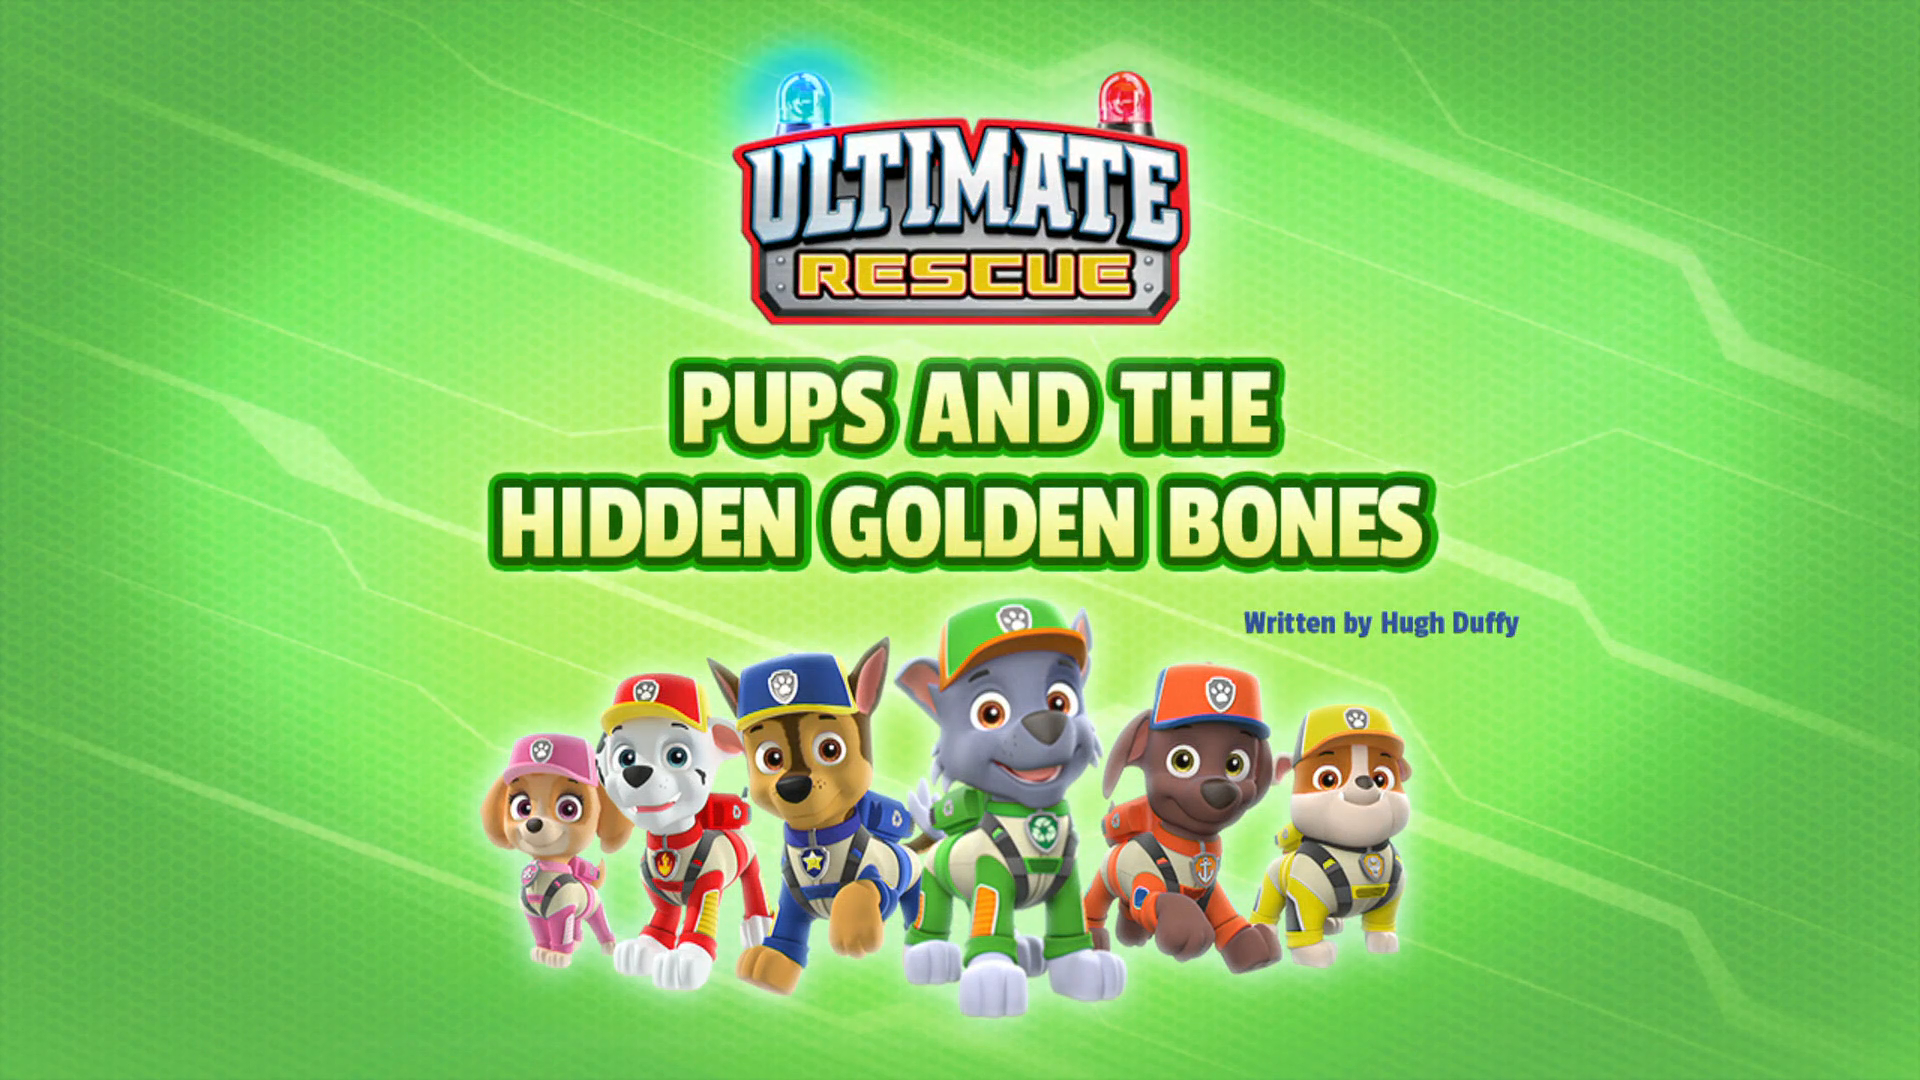 paw patrol ultimate rescue 2018